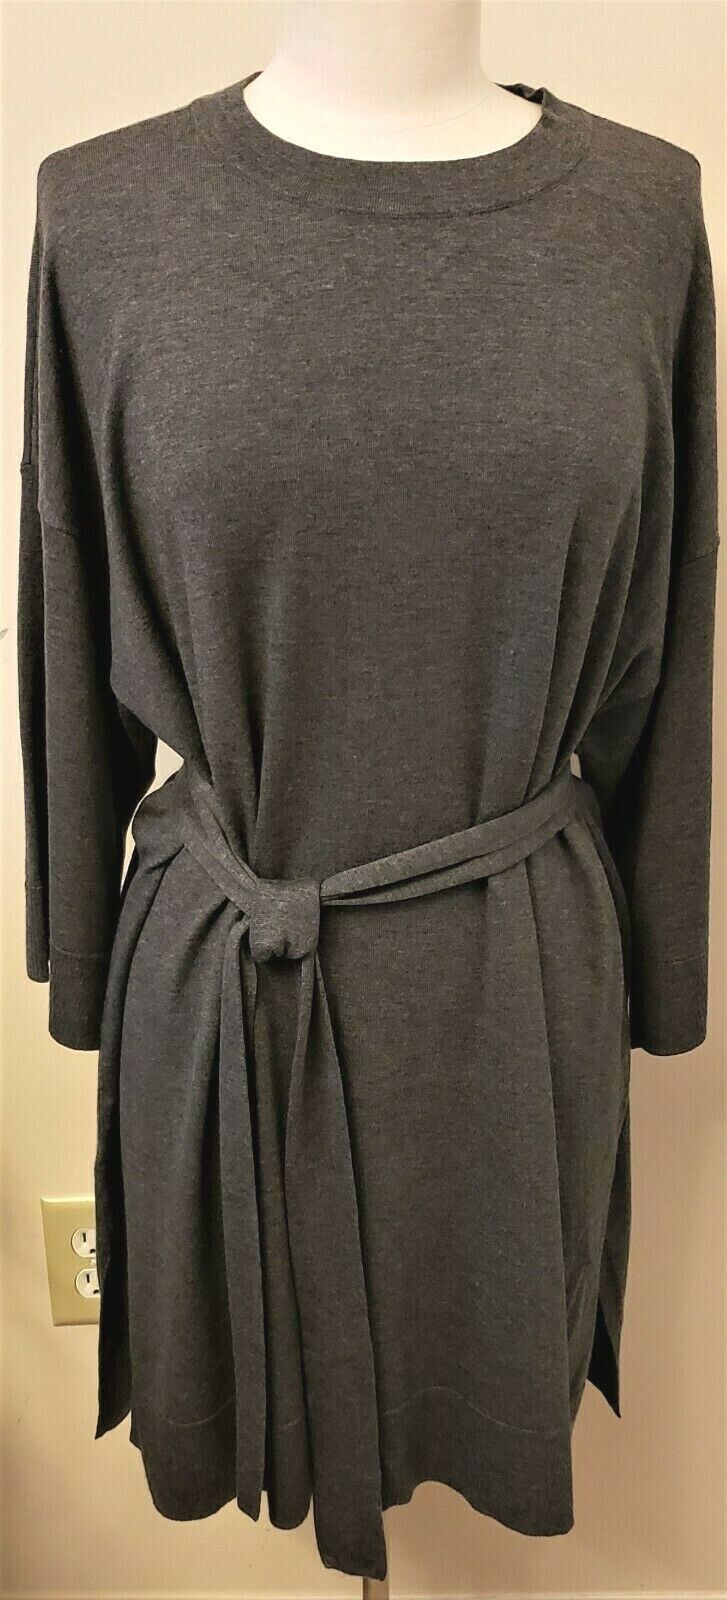 Primary image for Eileen Fisher Belted Tunic/Dress Sz- XL Ash/Gray